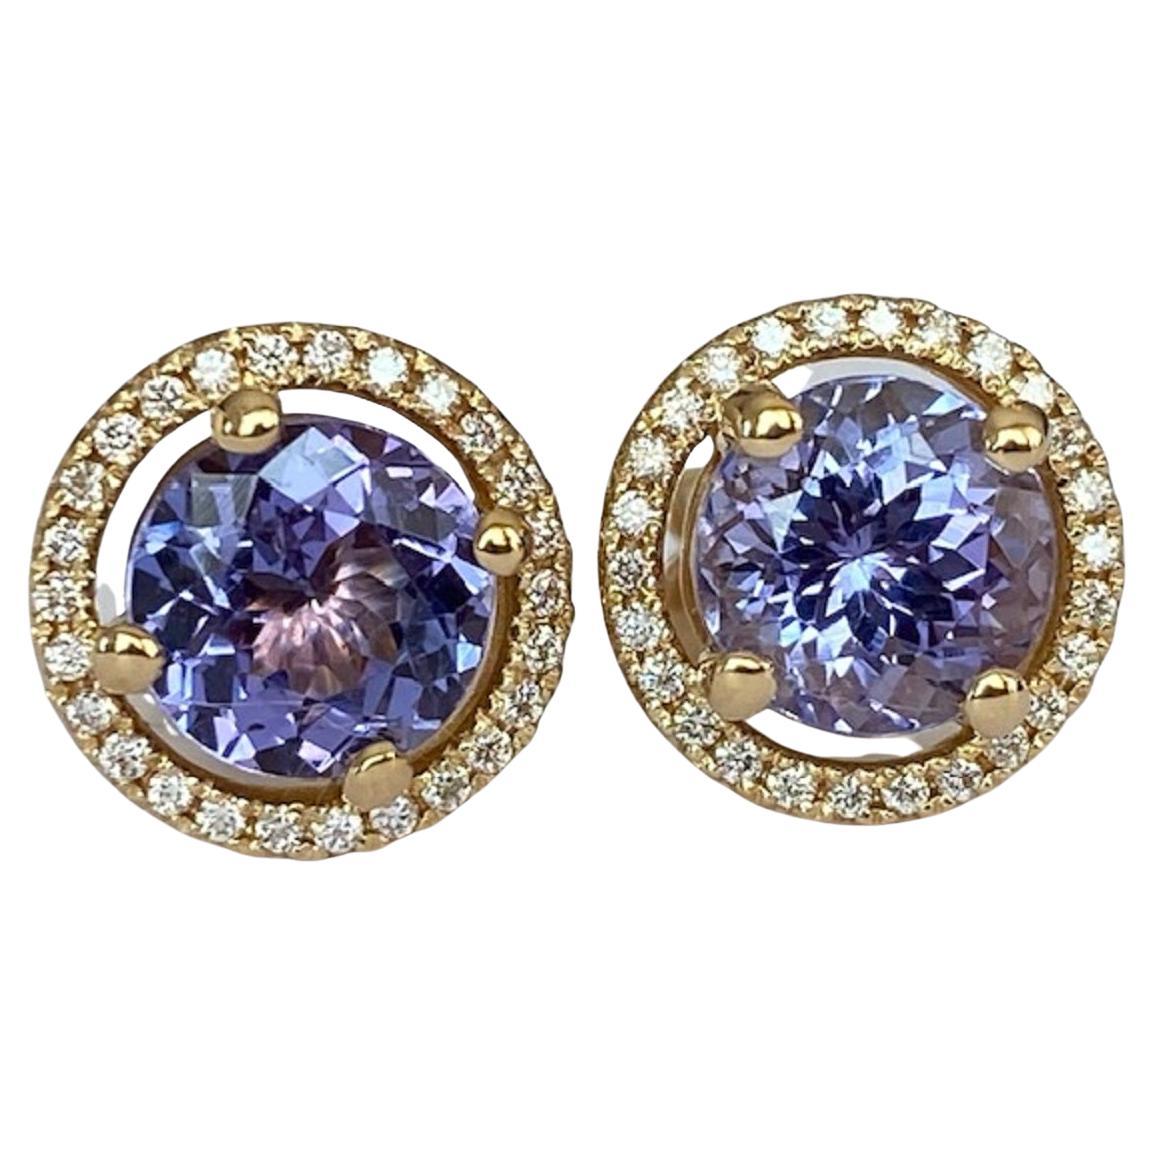 HALO ear studs 18 KT in yellow gold, with two pieces of tanzanite and diamonds